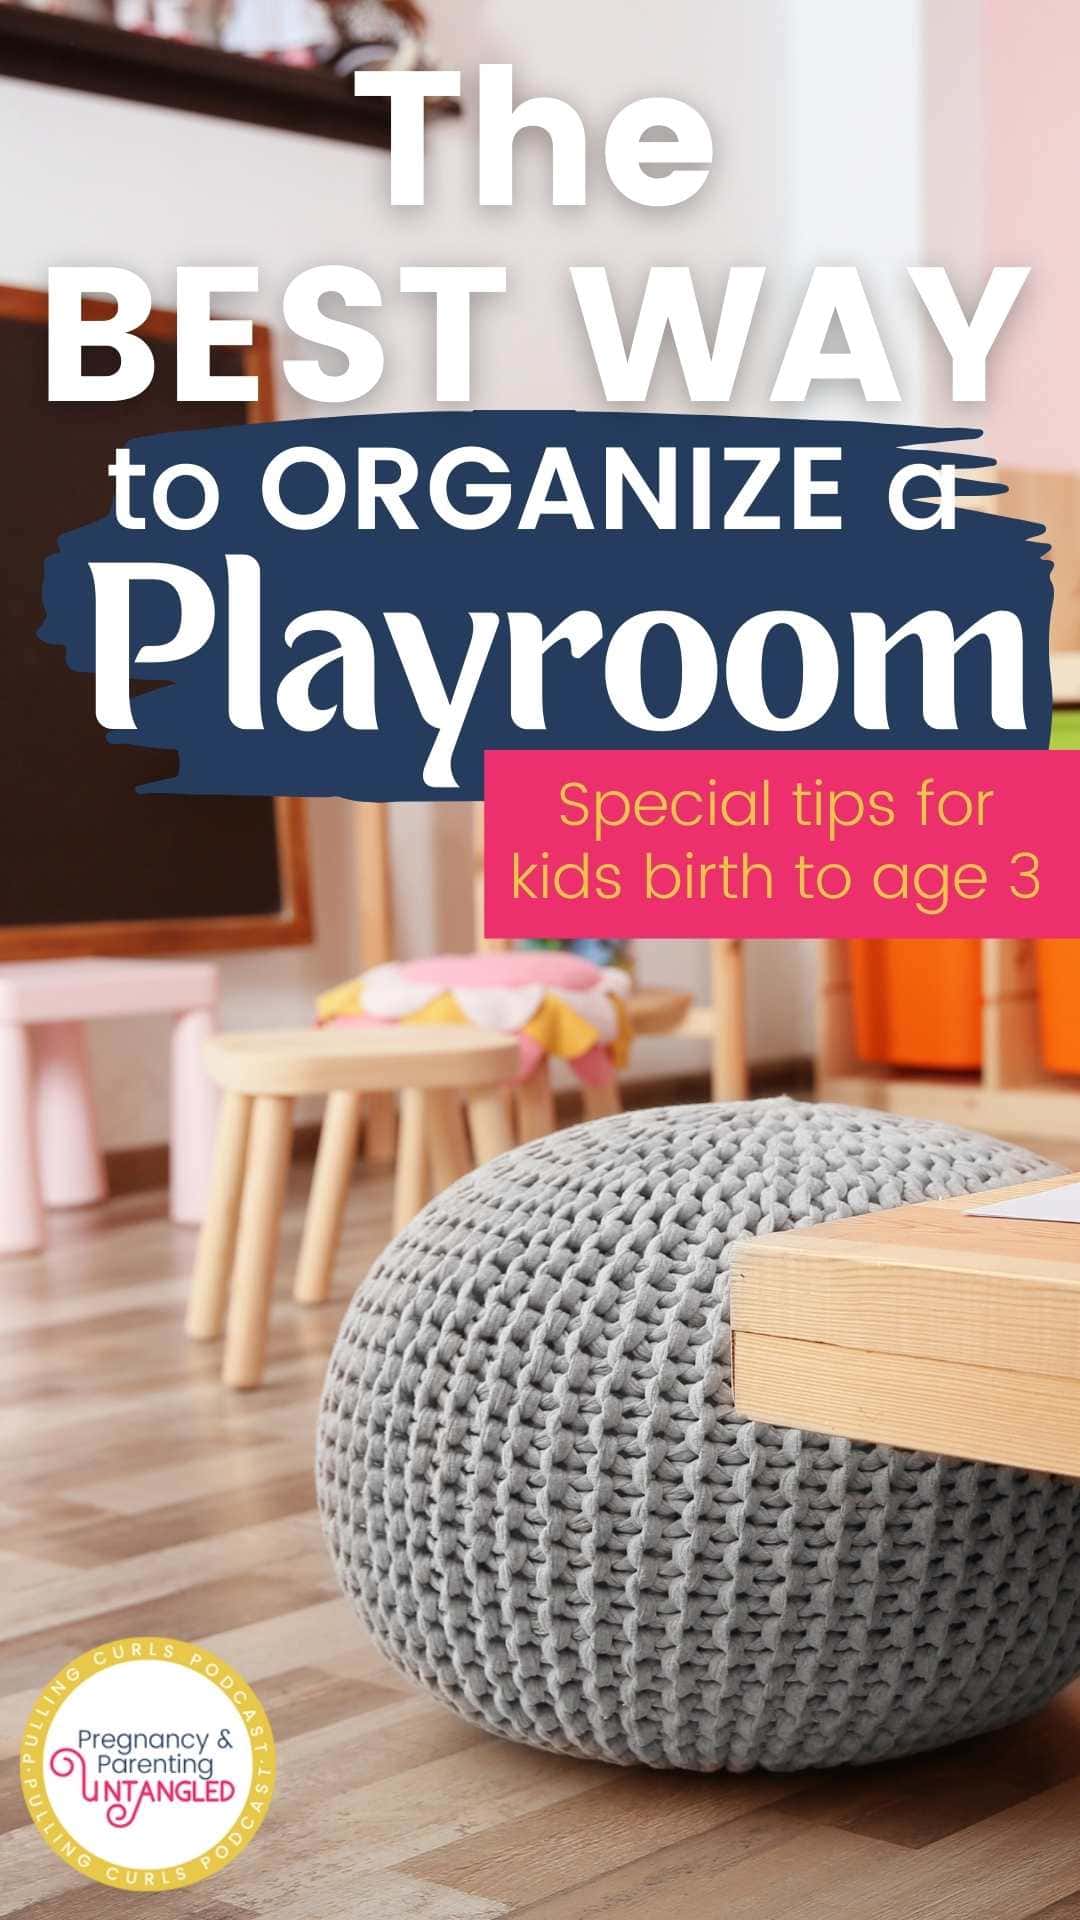 We are chatting about organizing your playroom, and what you can do to make it the most play-able and easy for your kids to explore and learn (without the drag of them not cleaning things up). via @pullingcurls